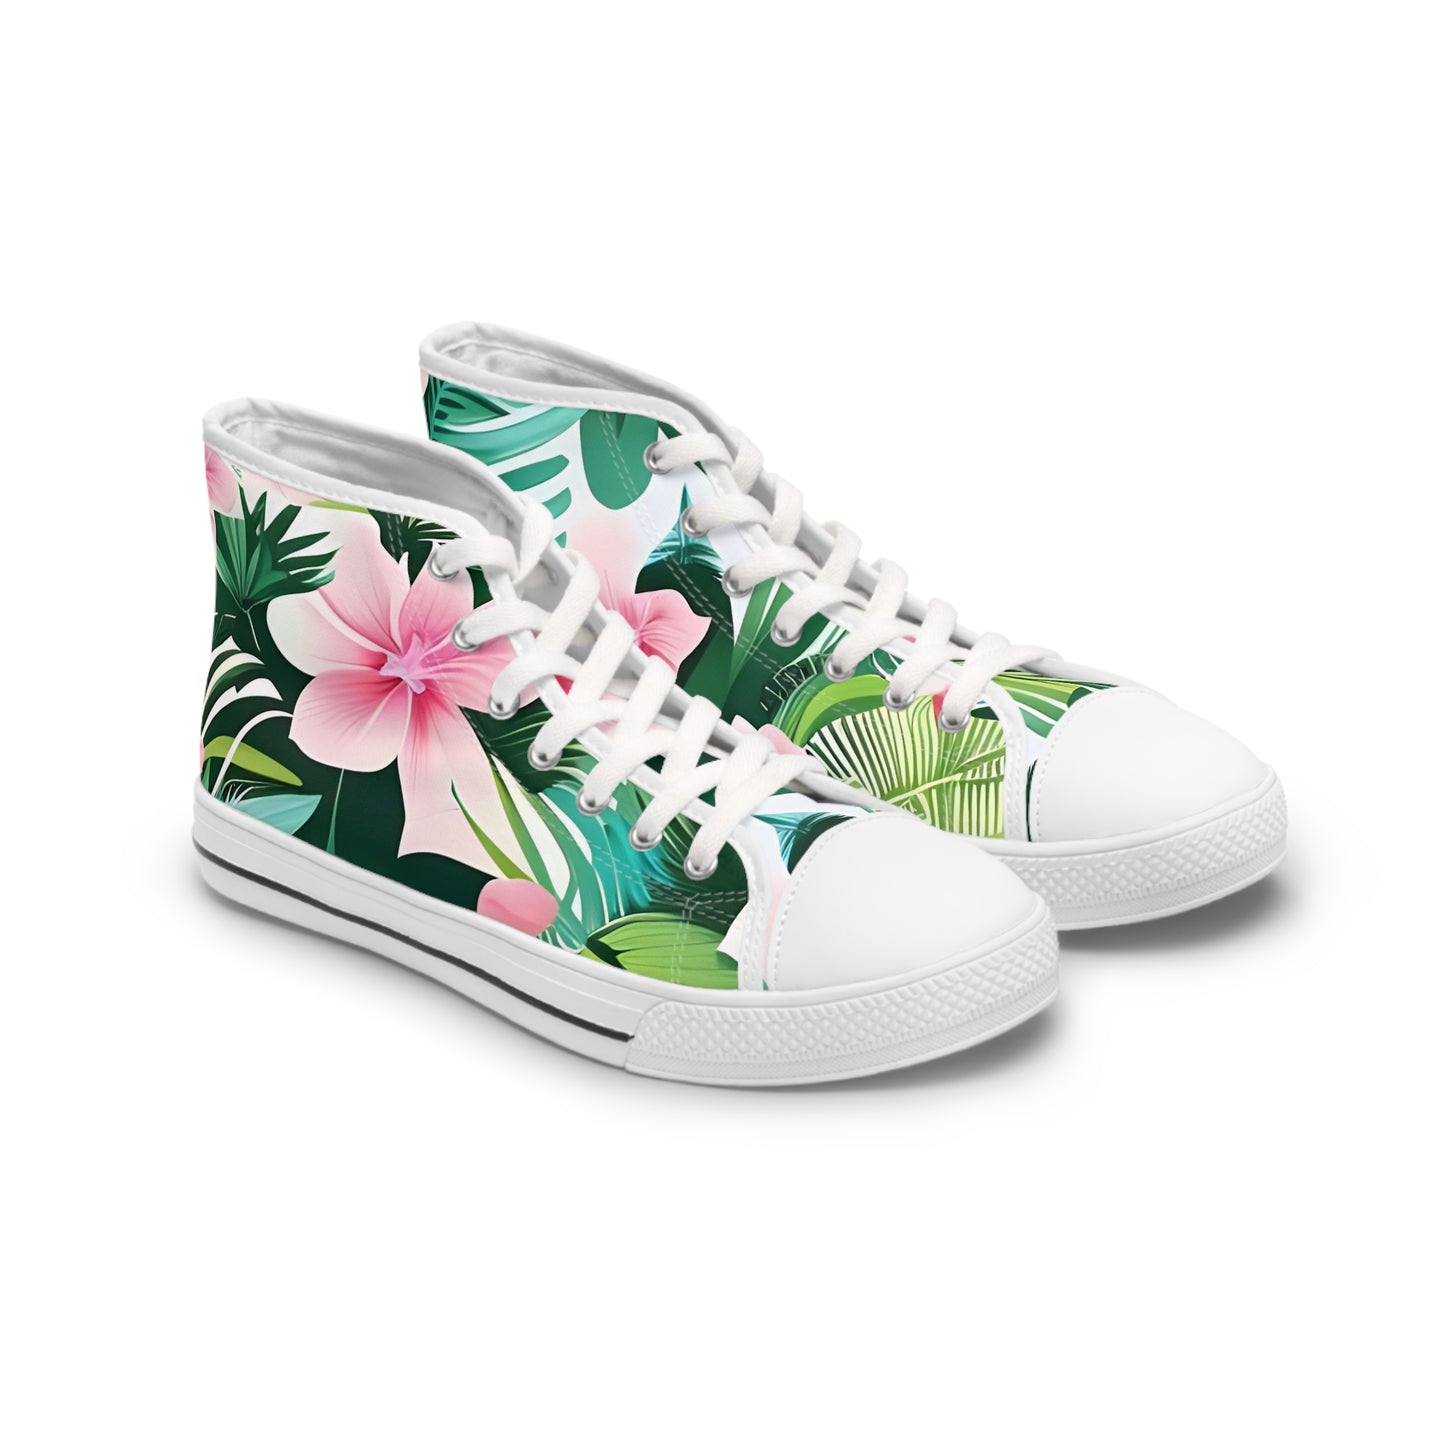 Tropical Vibes Limited Edition Women's High Top Sneakers